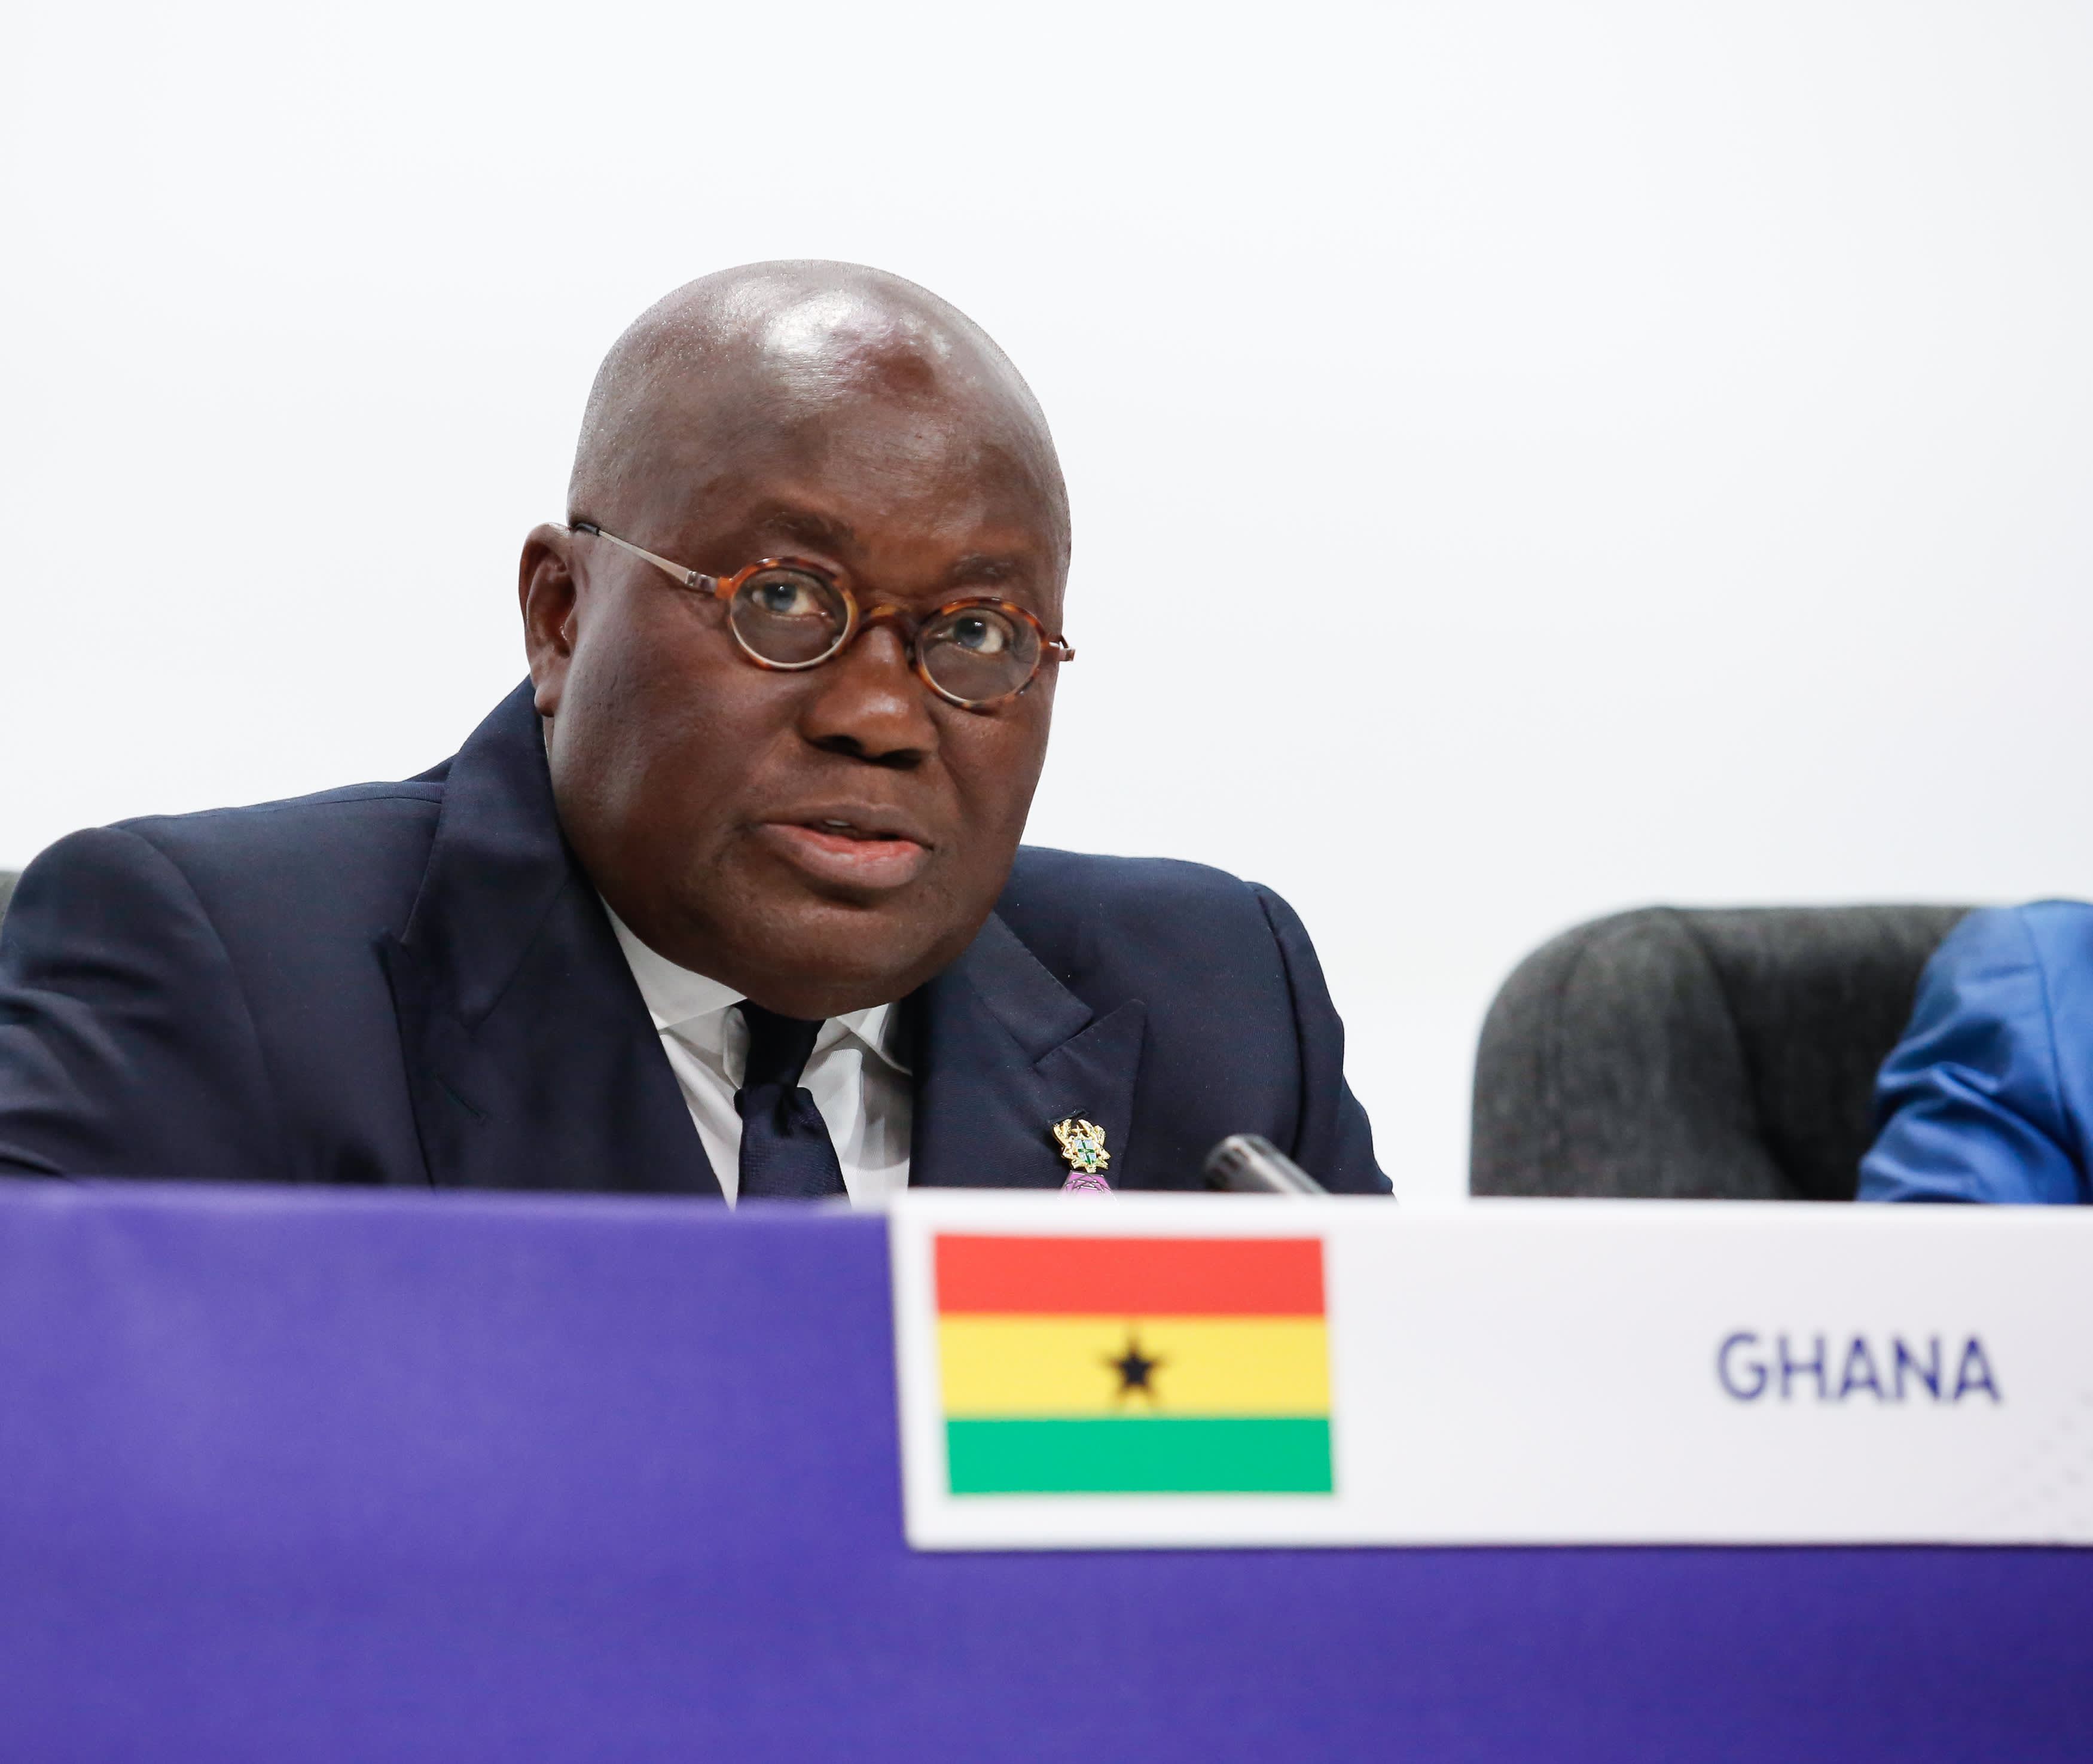 China's $2 billion deal with Ghana sparks fears over debt, influence and the environment - CNBC